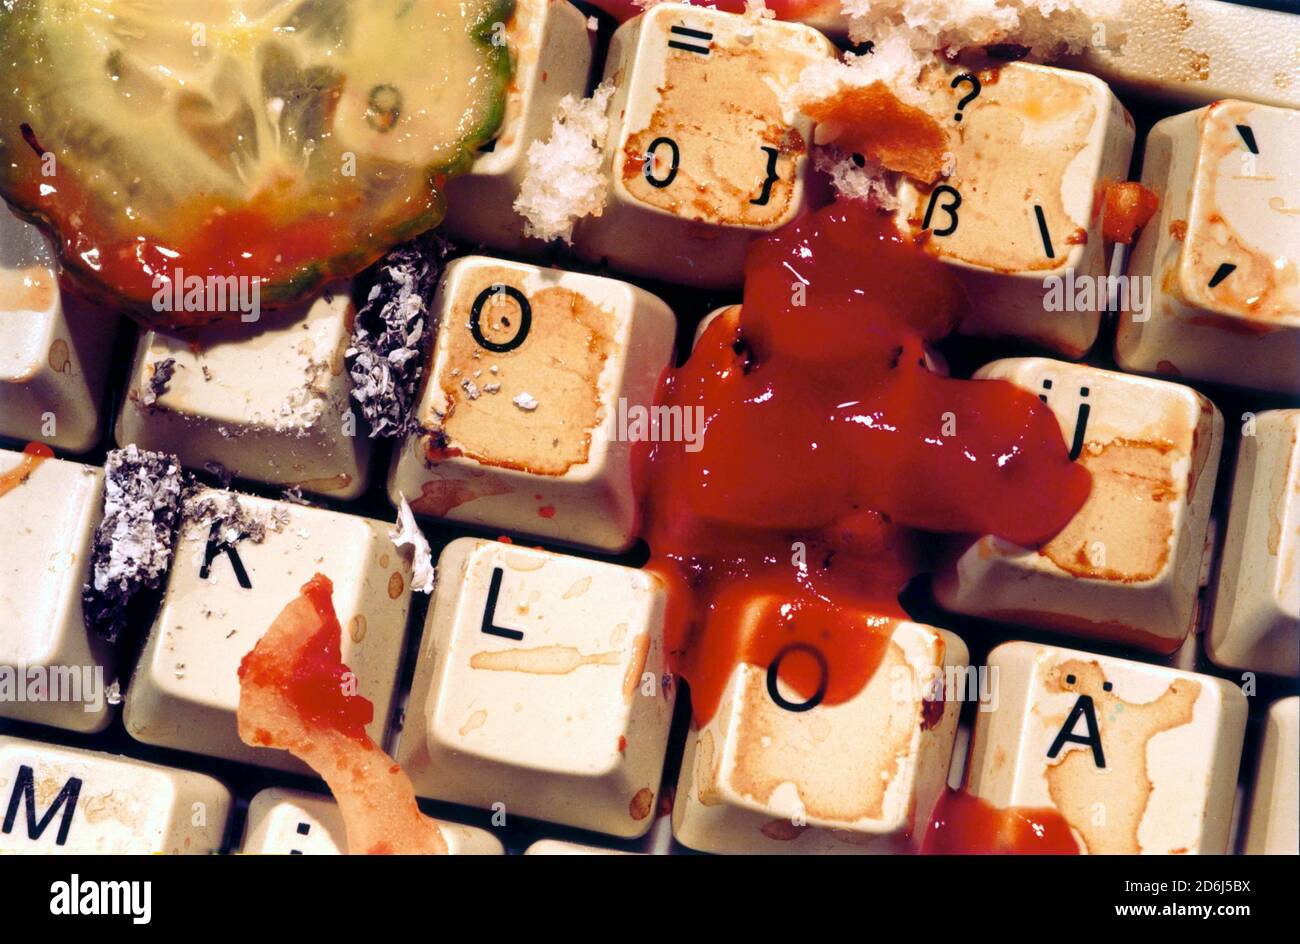 Leftovers and ashes on the keyboard, disgusting, ketchup, cucumber, Berlin, Germany Stock Photo